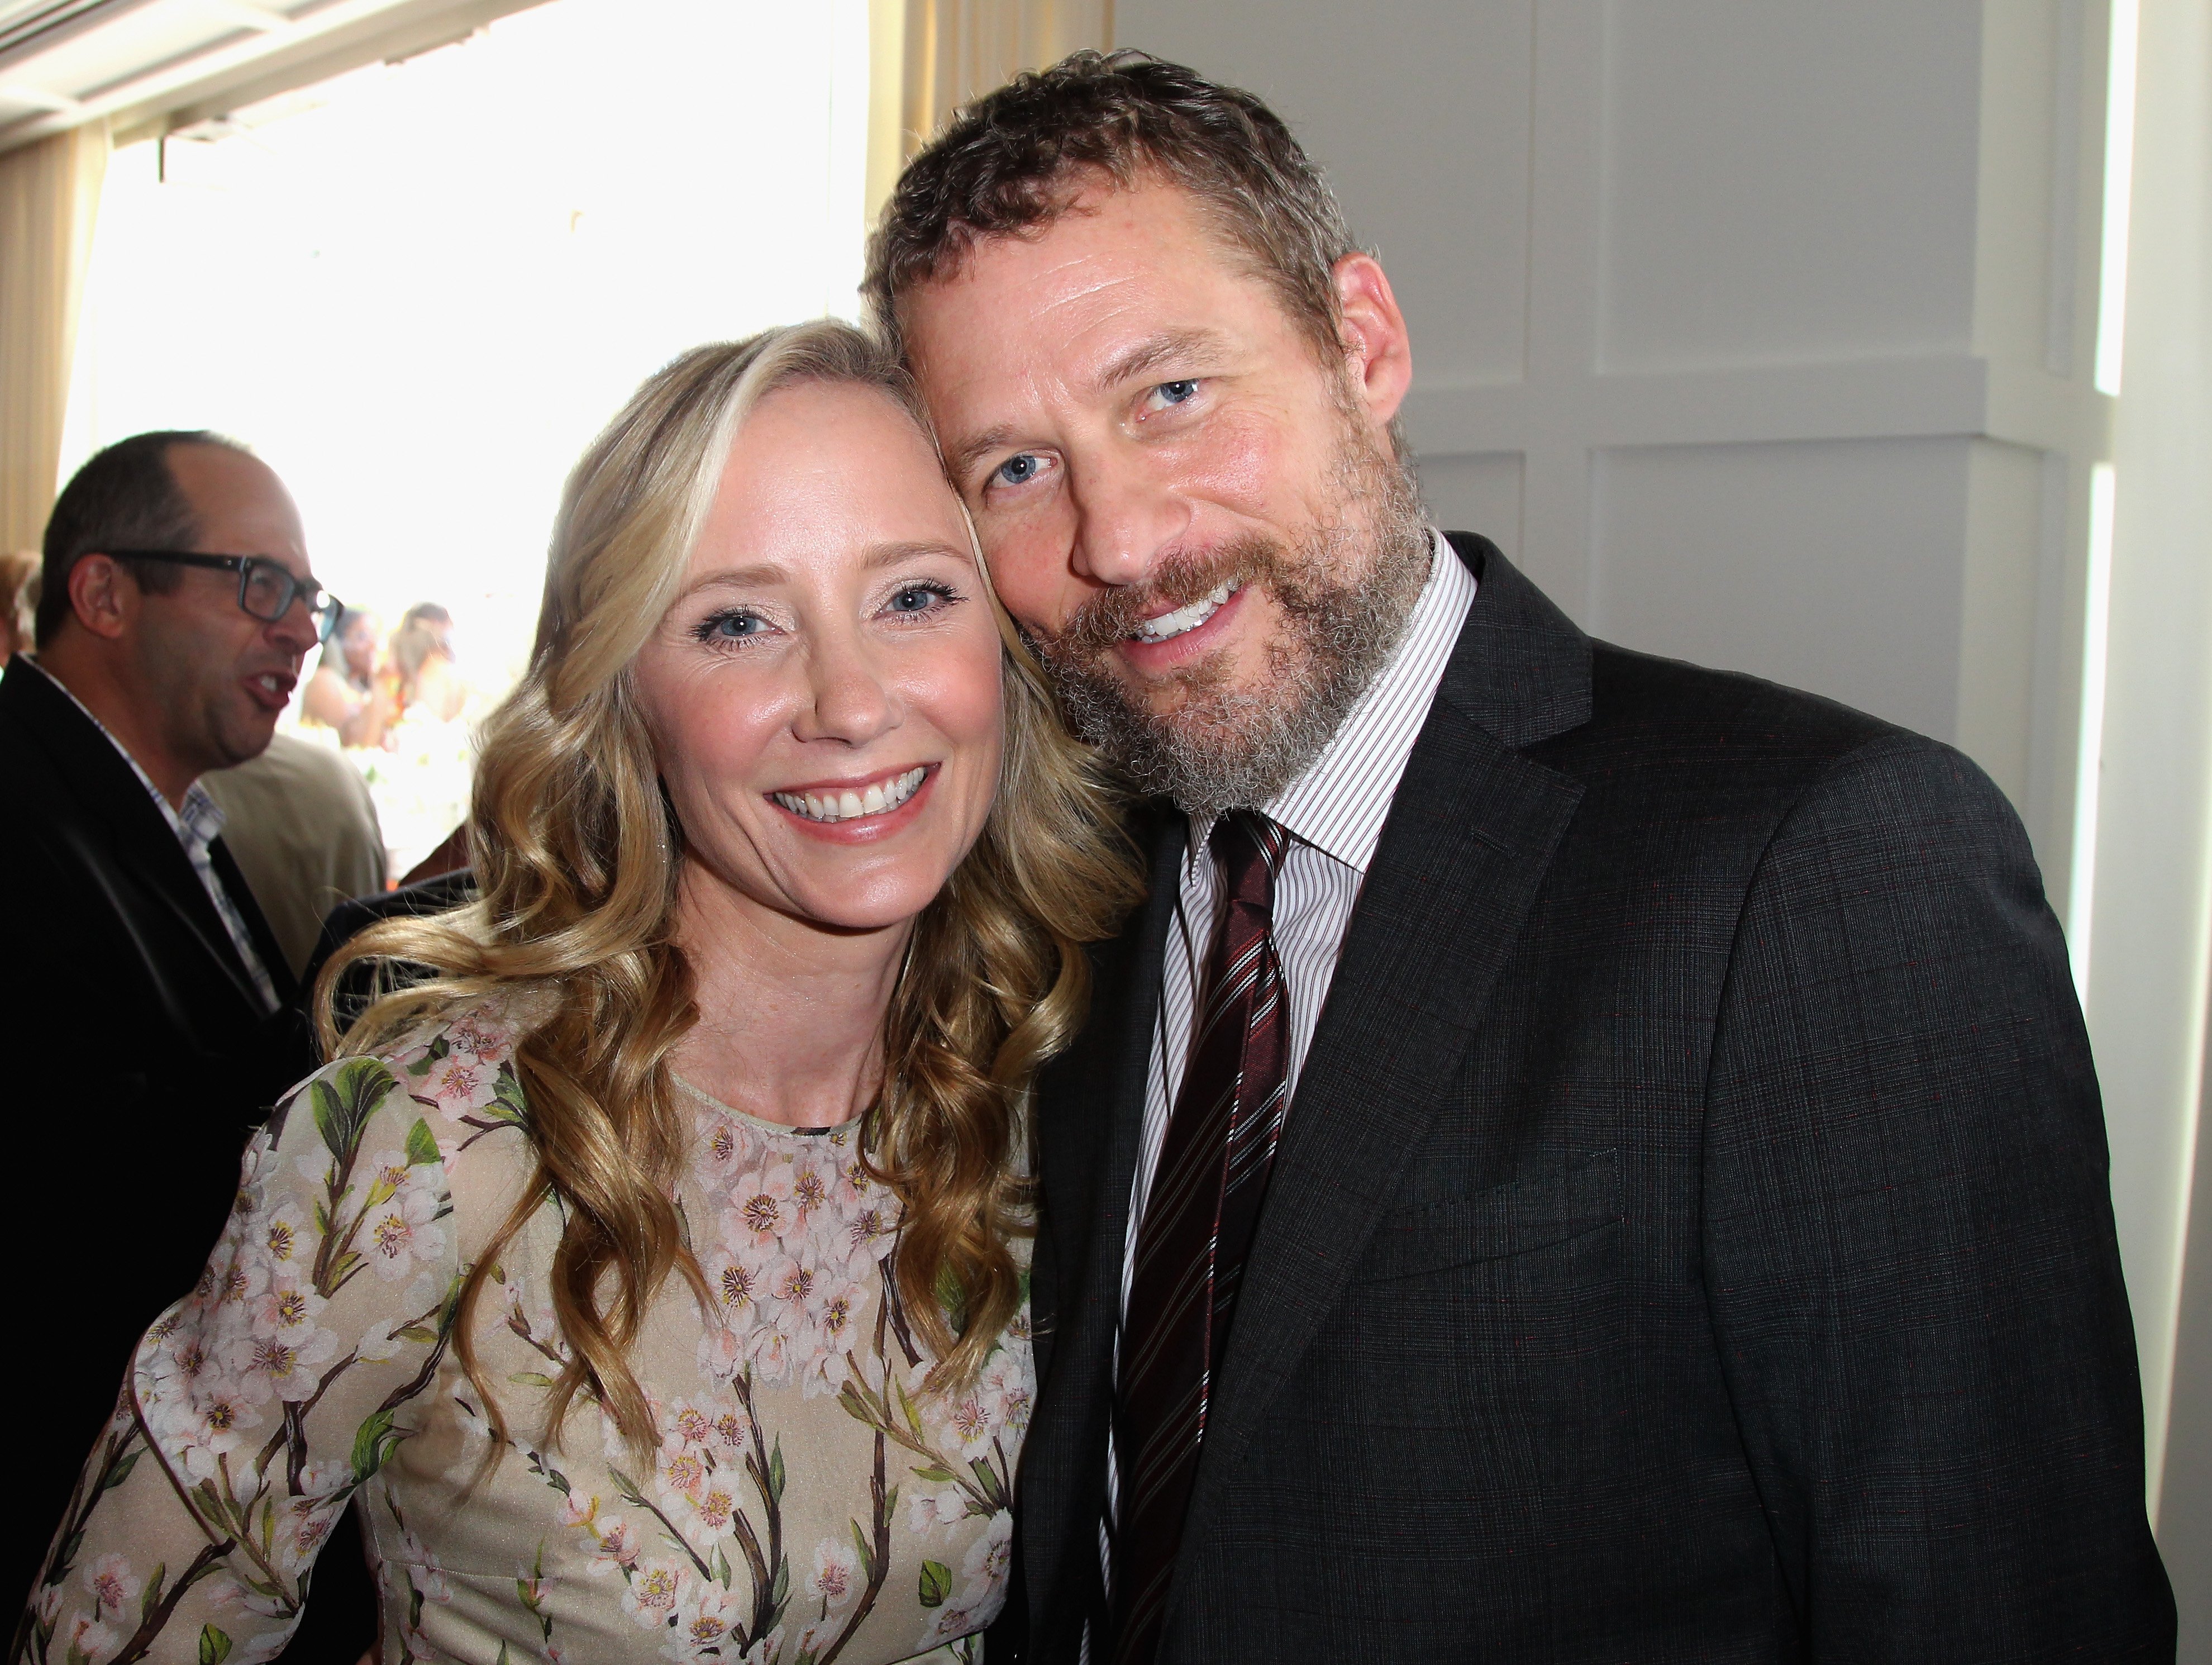 Actress Anne Heche and James Tupper during the 2014 BAFTA Los Angeles TV Tea presented by BBC America and Jaguar at SLS Hotel on August 23, 2014 in Beverly Hills, California. | Source: Getty Images